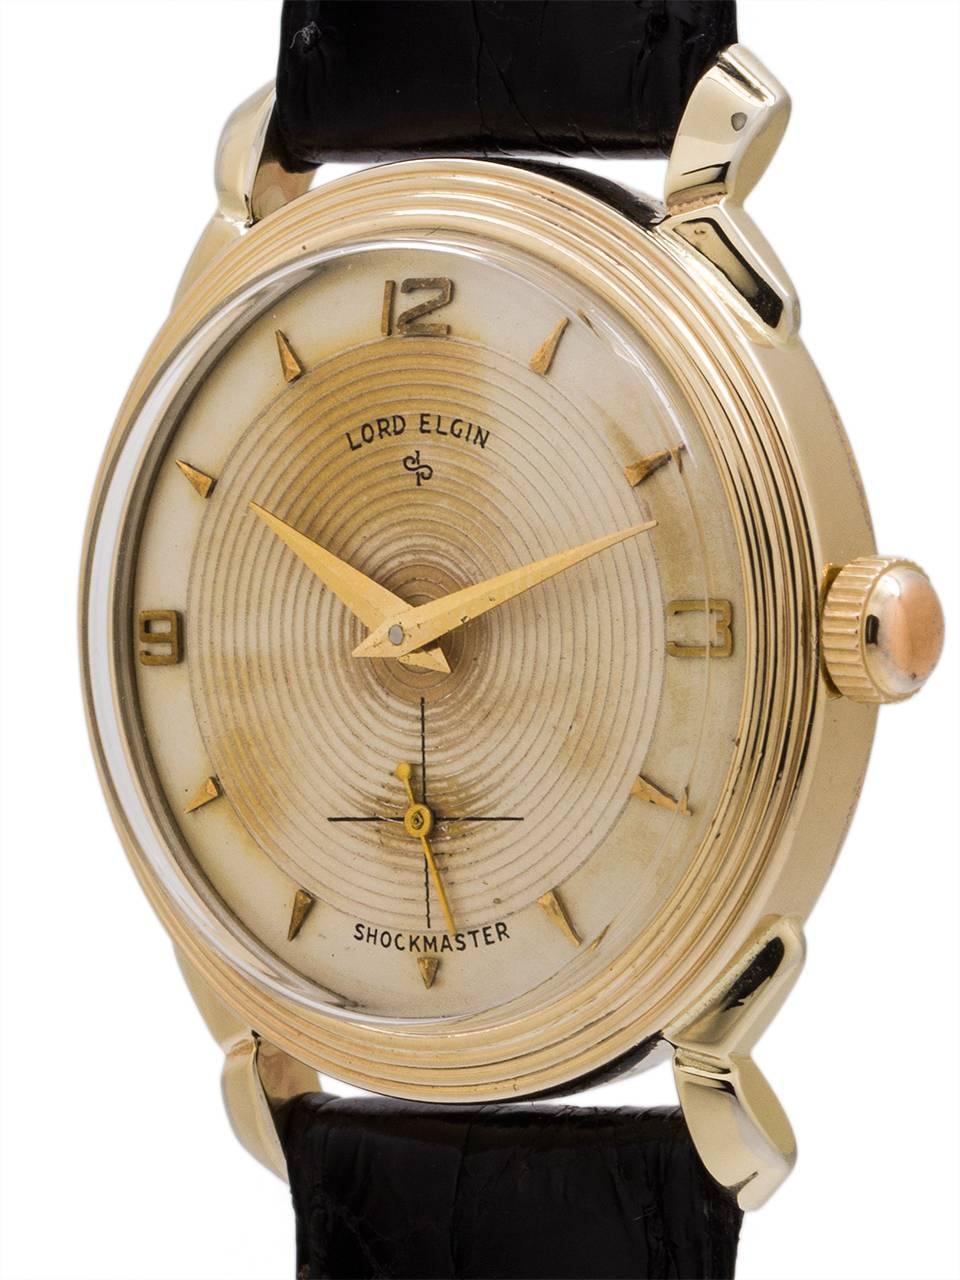 
Very cool “retro” design vintage man’s Lord Elgin manual wind dress model circa 1950’s. Featuring 32mm diameter screw back case with extended 40mm fancy lobed lugs, finely stepped bezel that matches the original antique white dial with finely